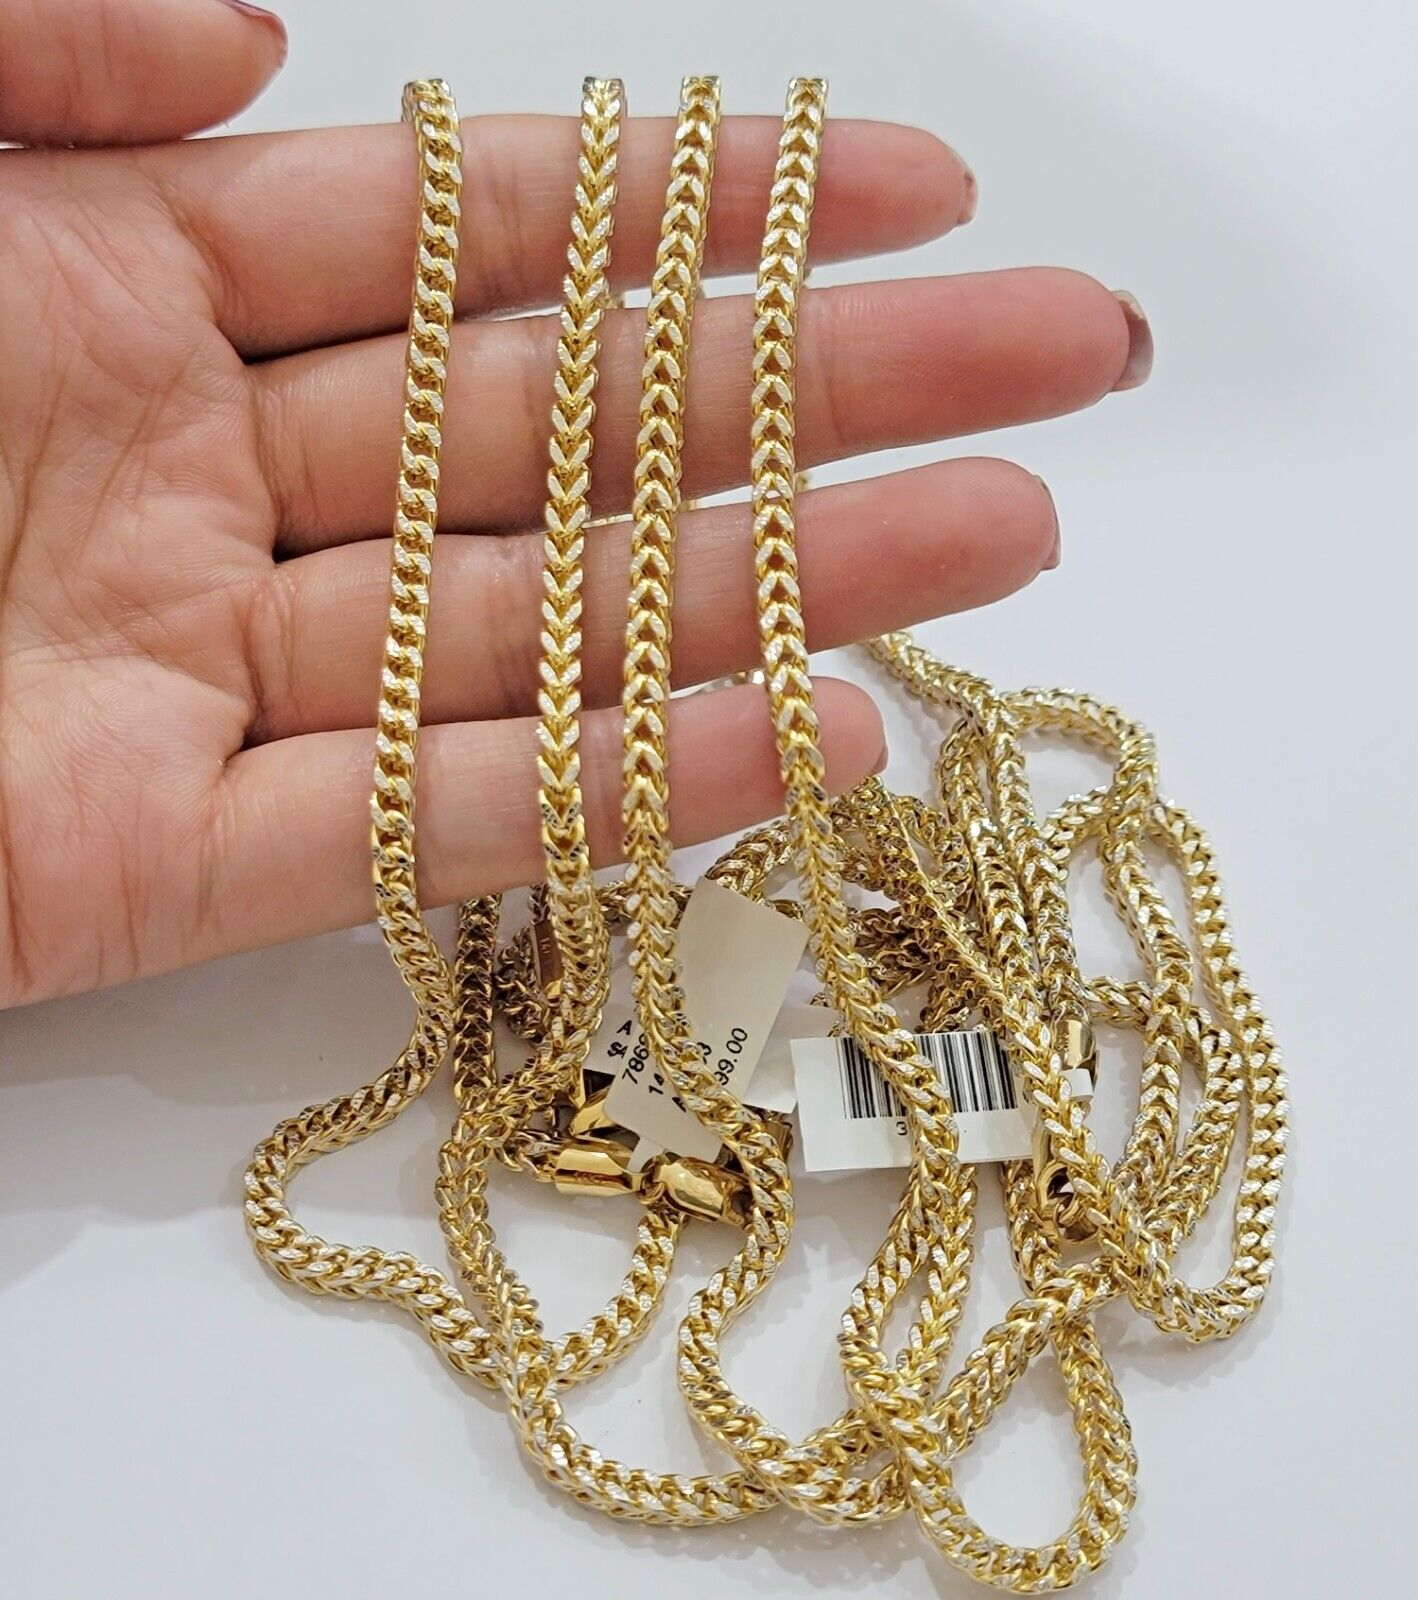 Real 14k Gold Chain Franco 3.5mm Necklace Diamond cut 20